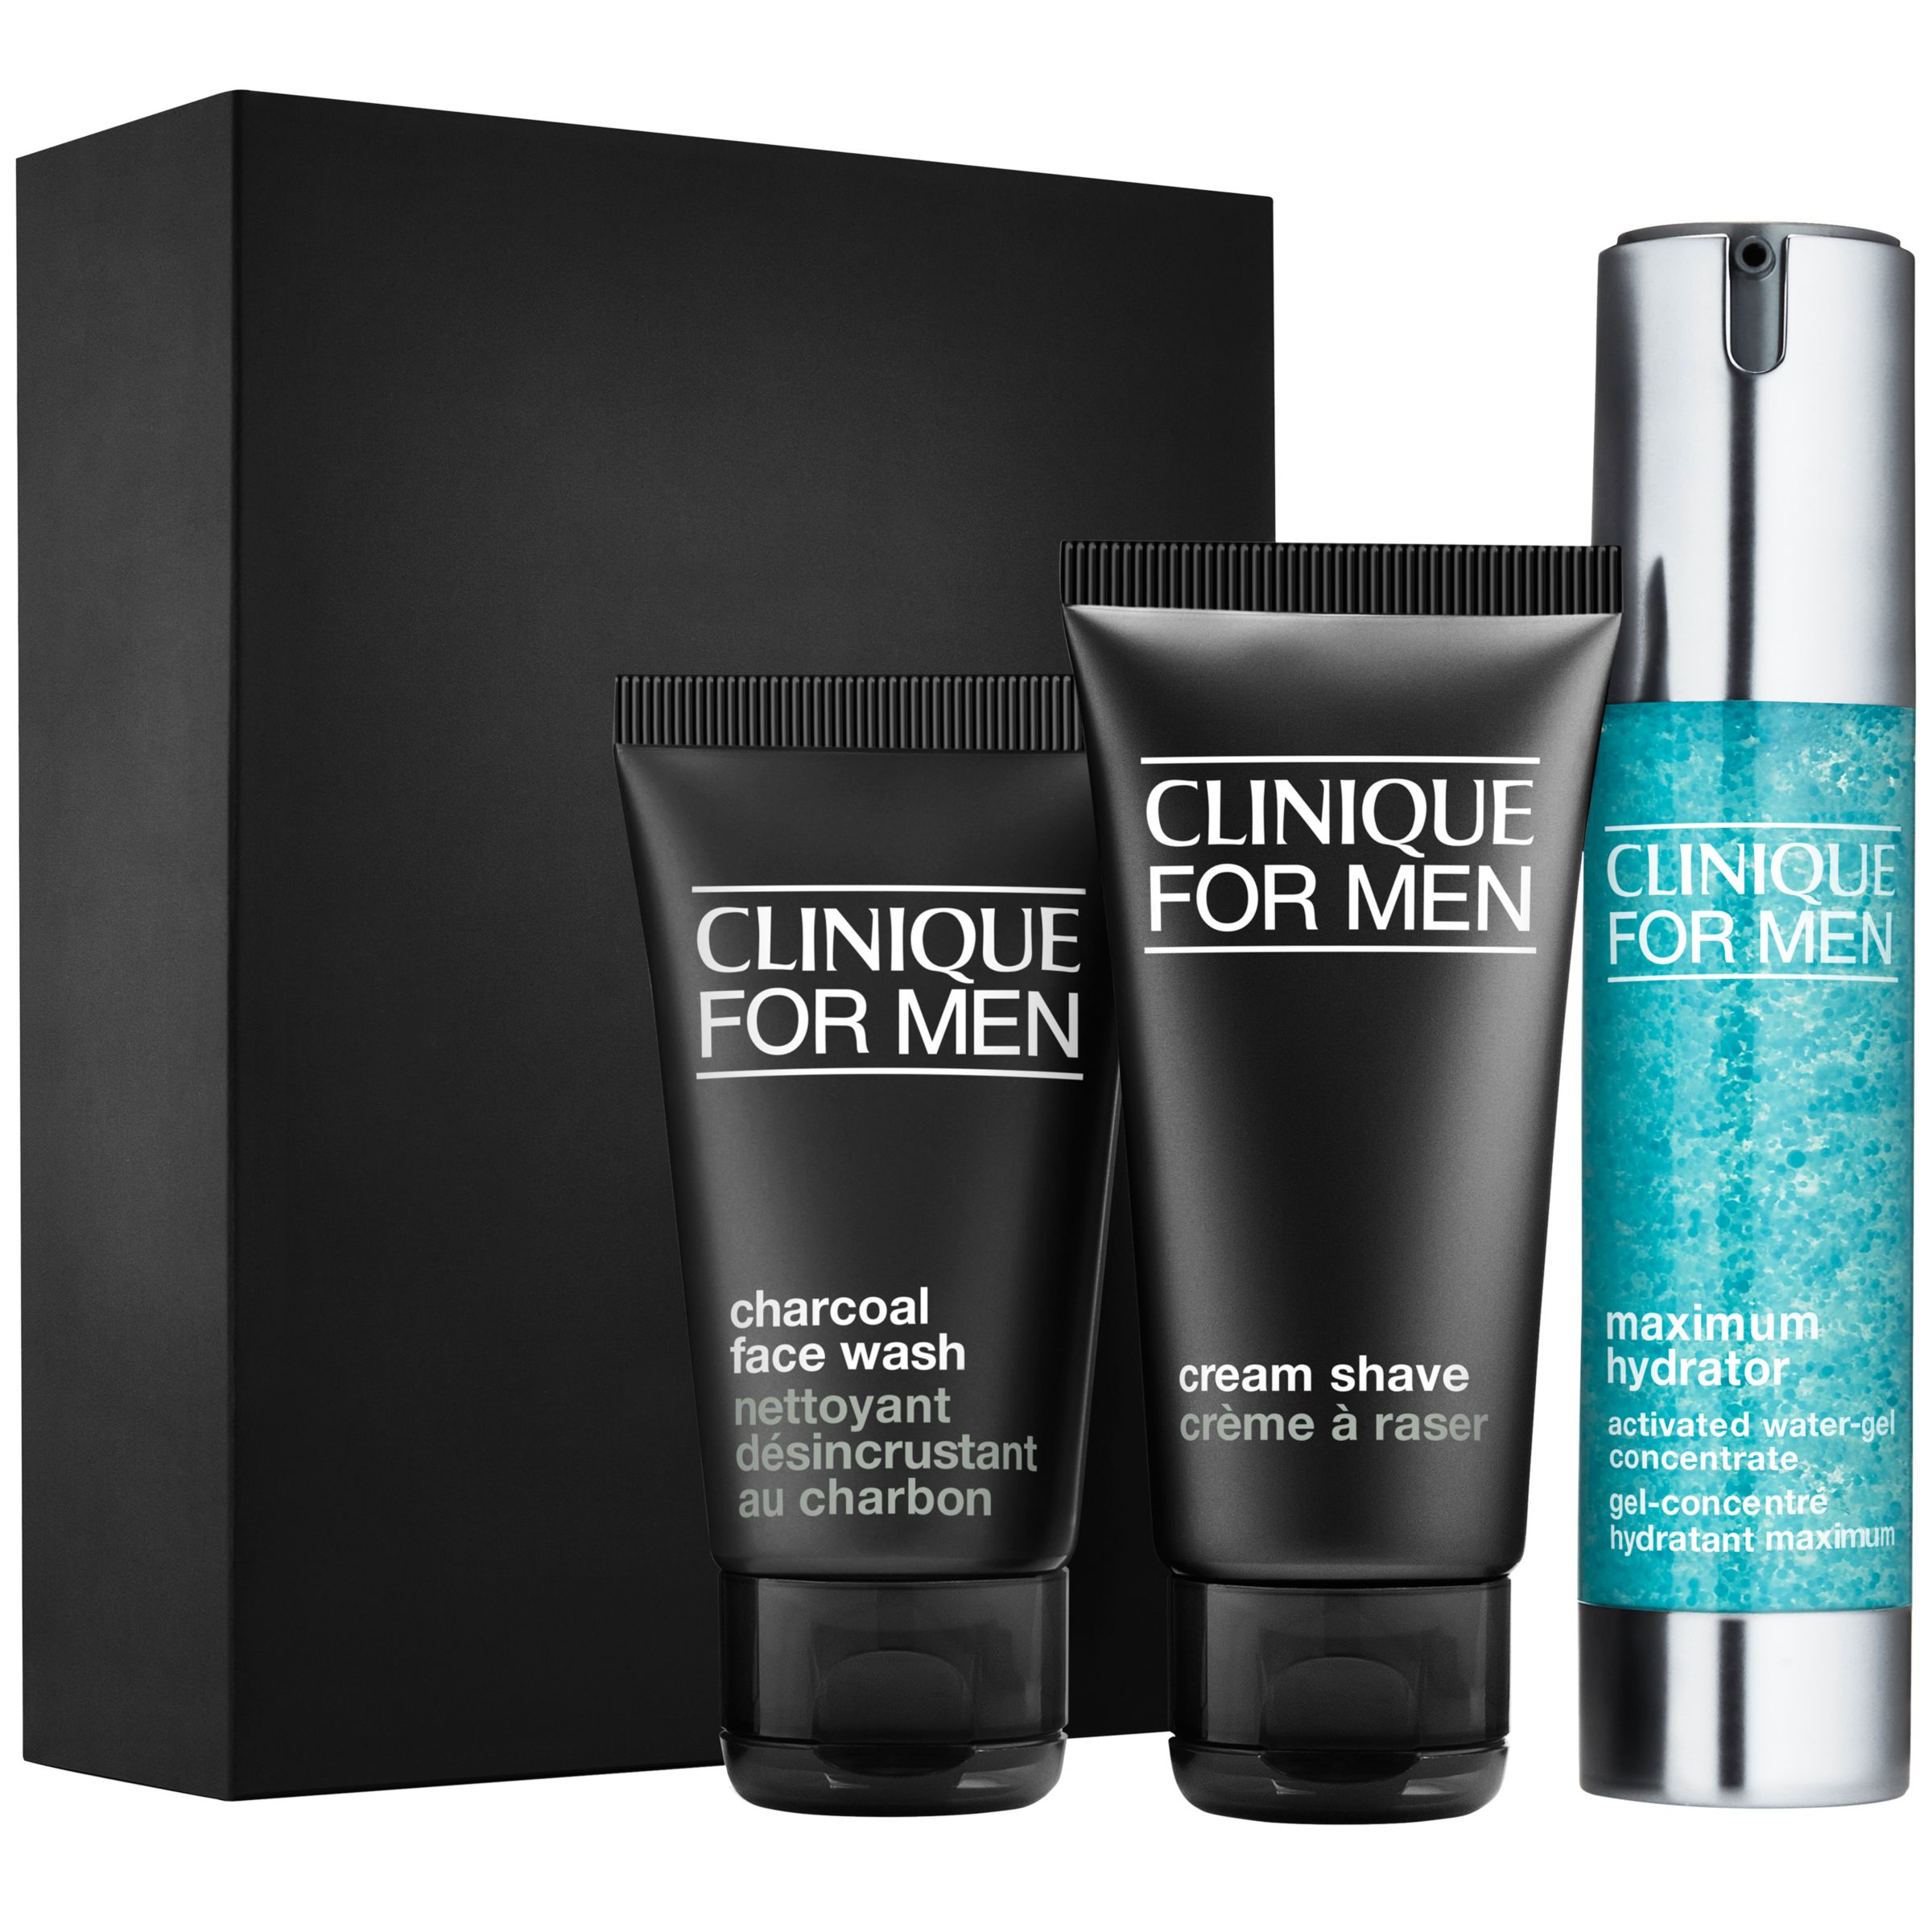 Clinique For Men Daily Intense Hydrator Skincare Kit